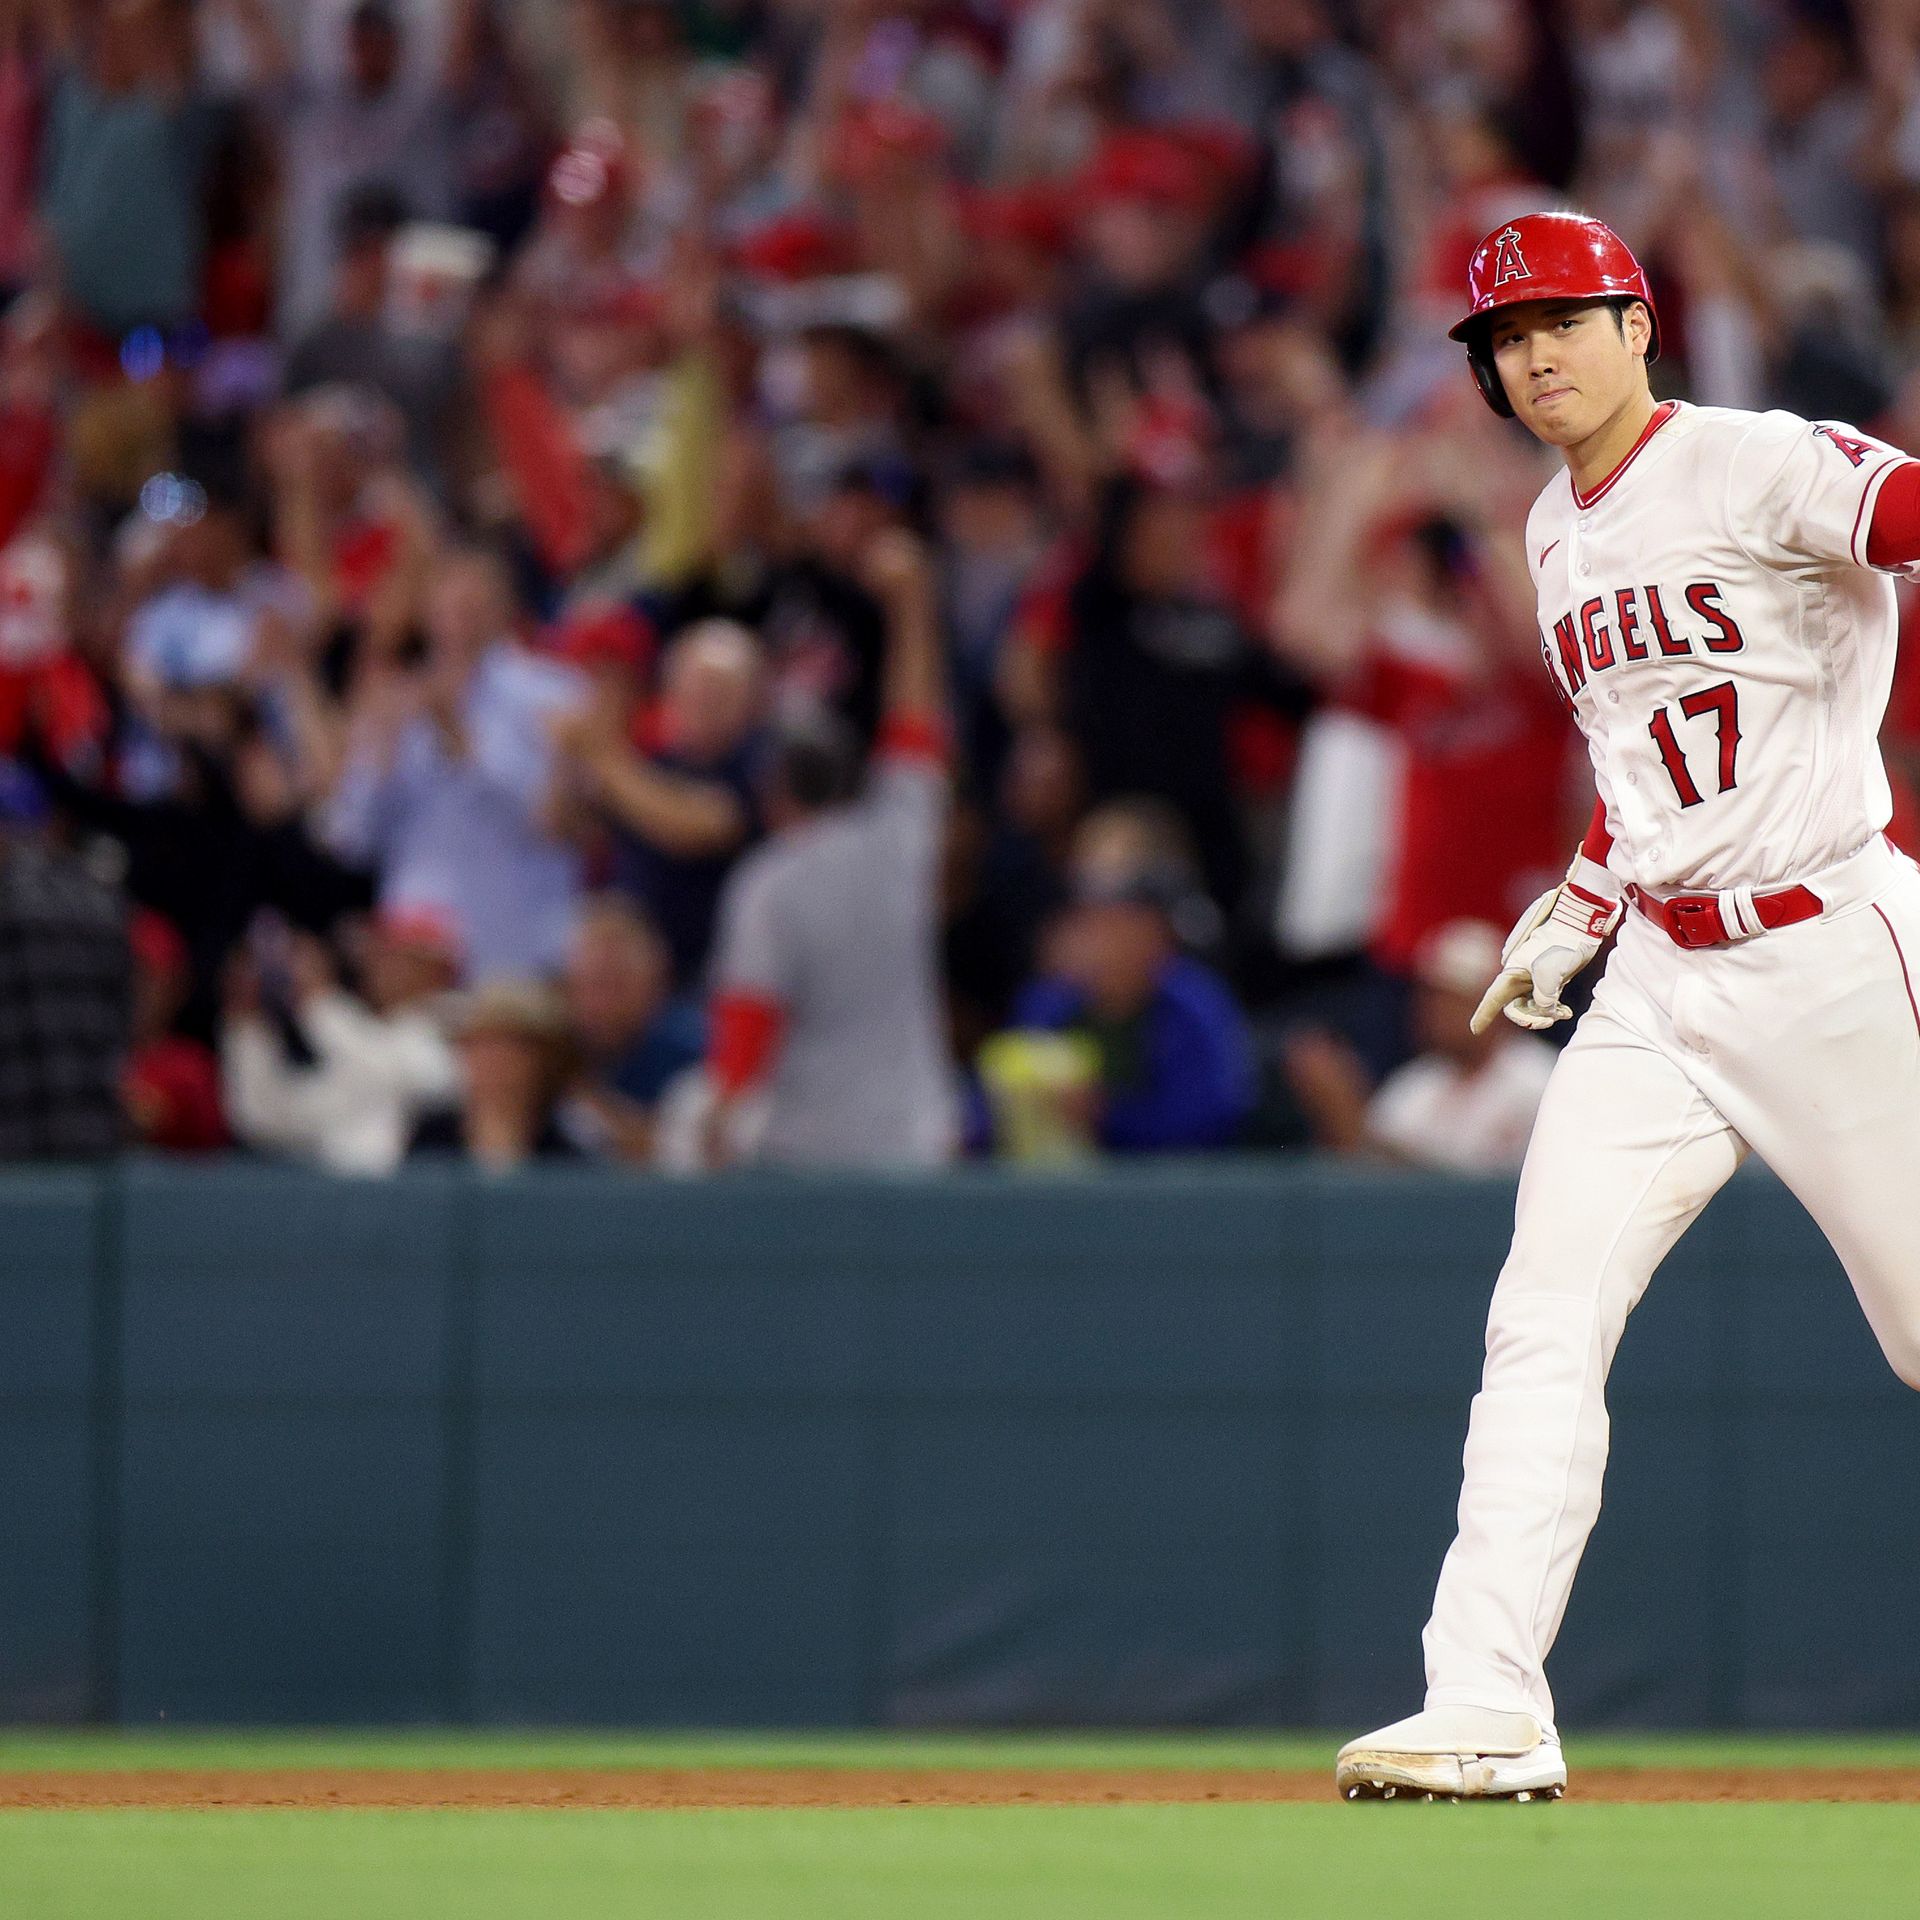 Shohei Ohtani: Why the Angels Need His Bat More Than His Arm